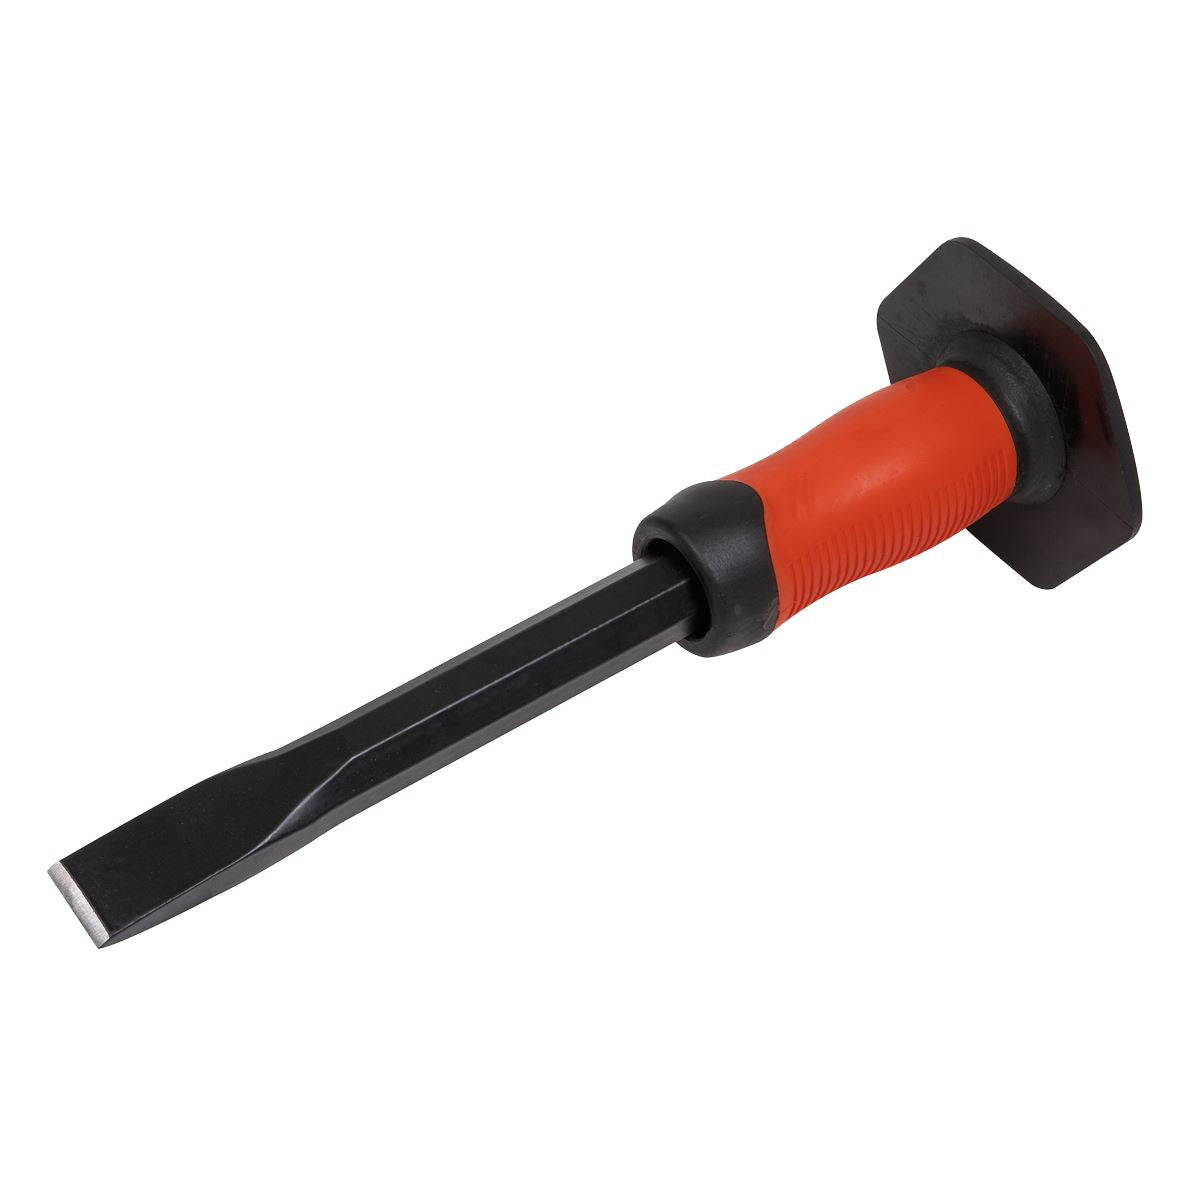 Sealey Cold Chisel With Grip 25 x 300mm